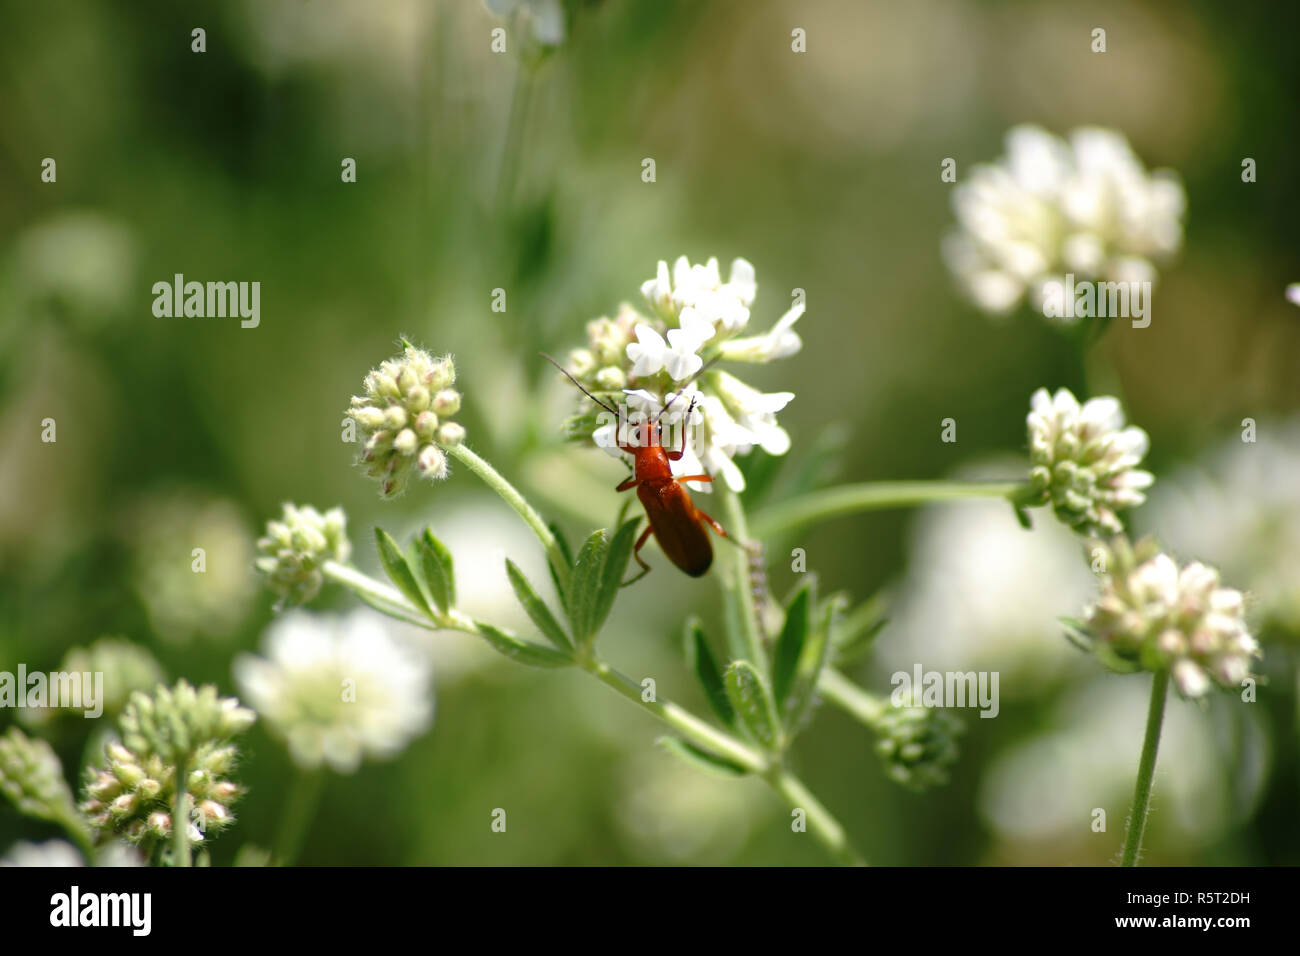 red soft beetle on baking clover Stock Photo